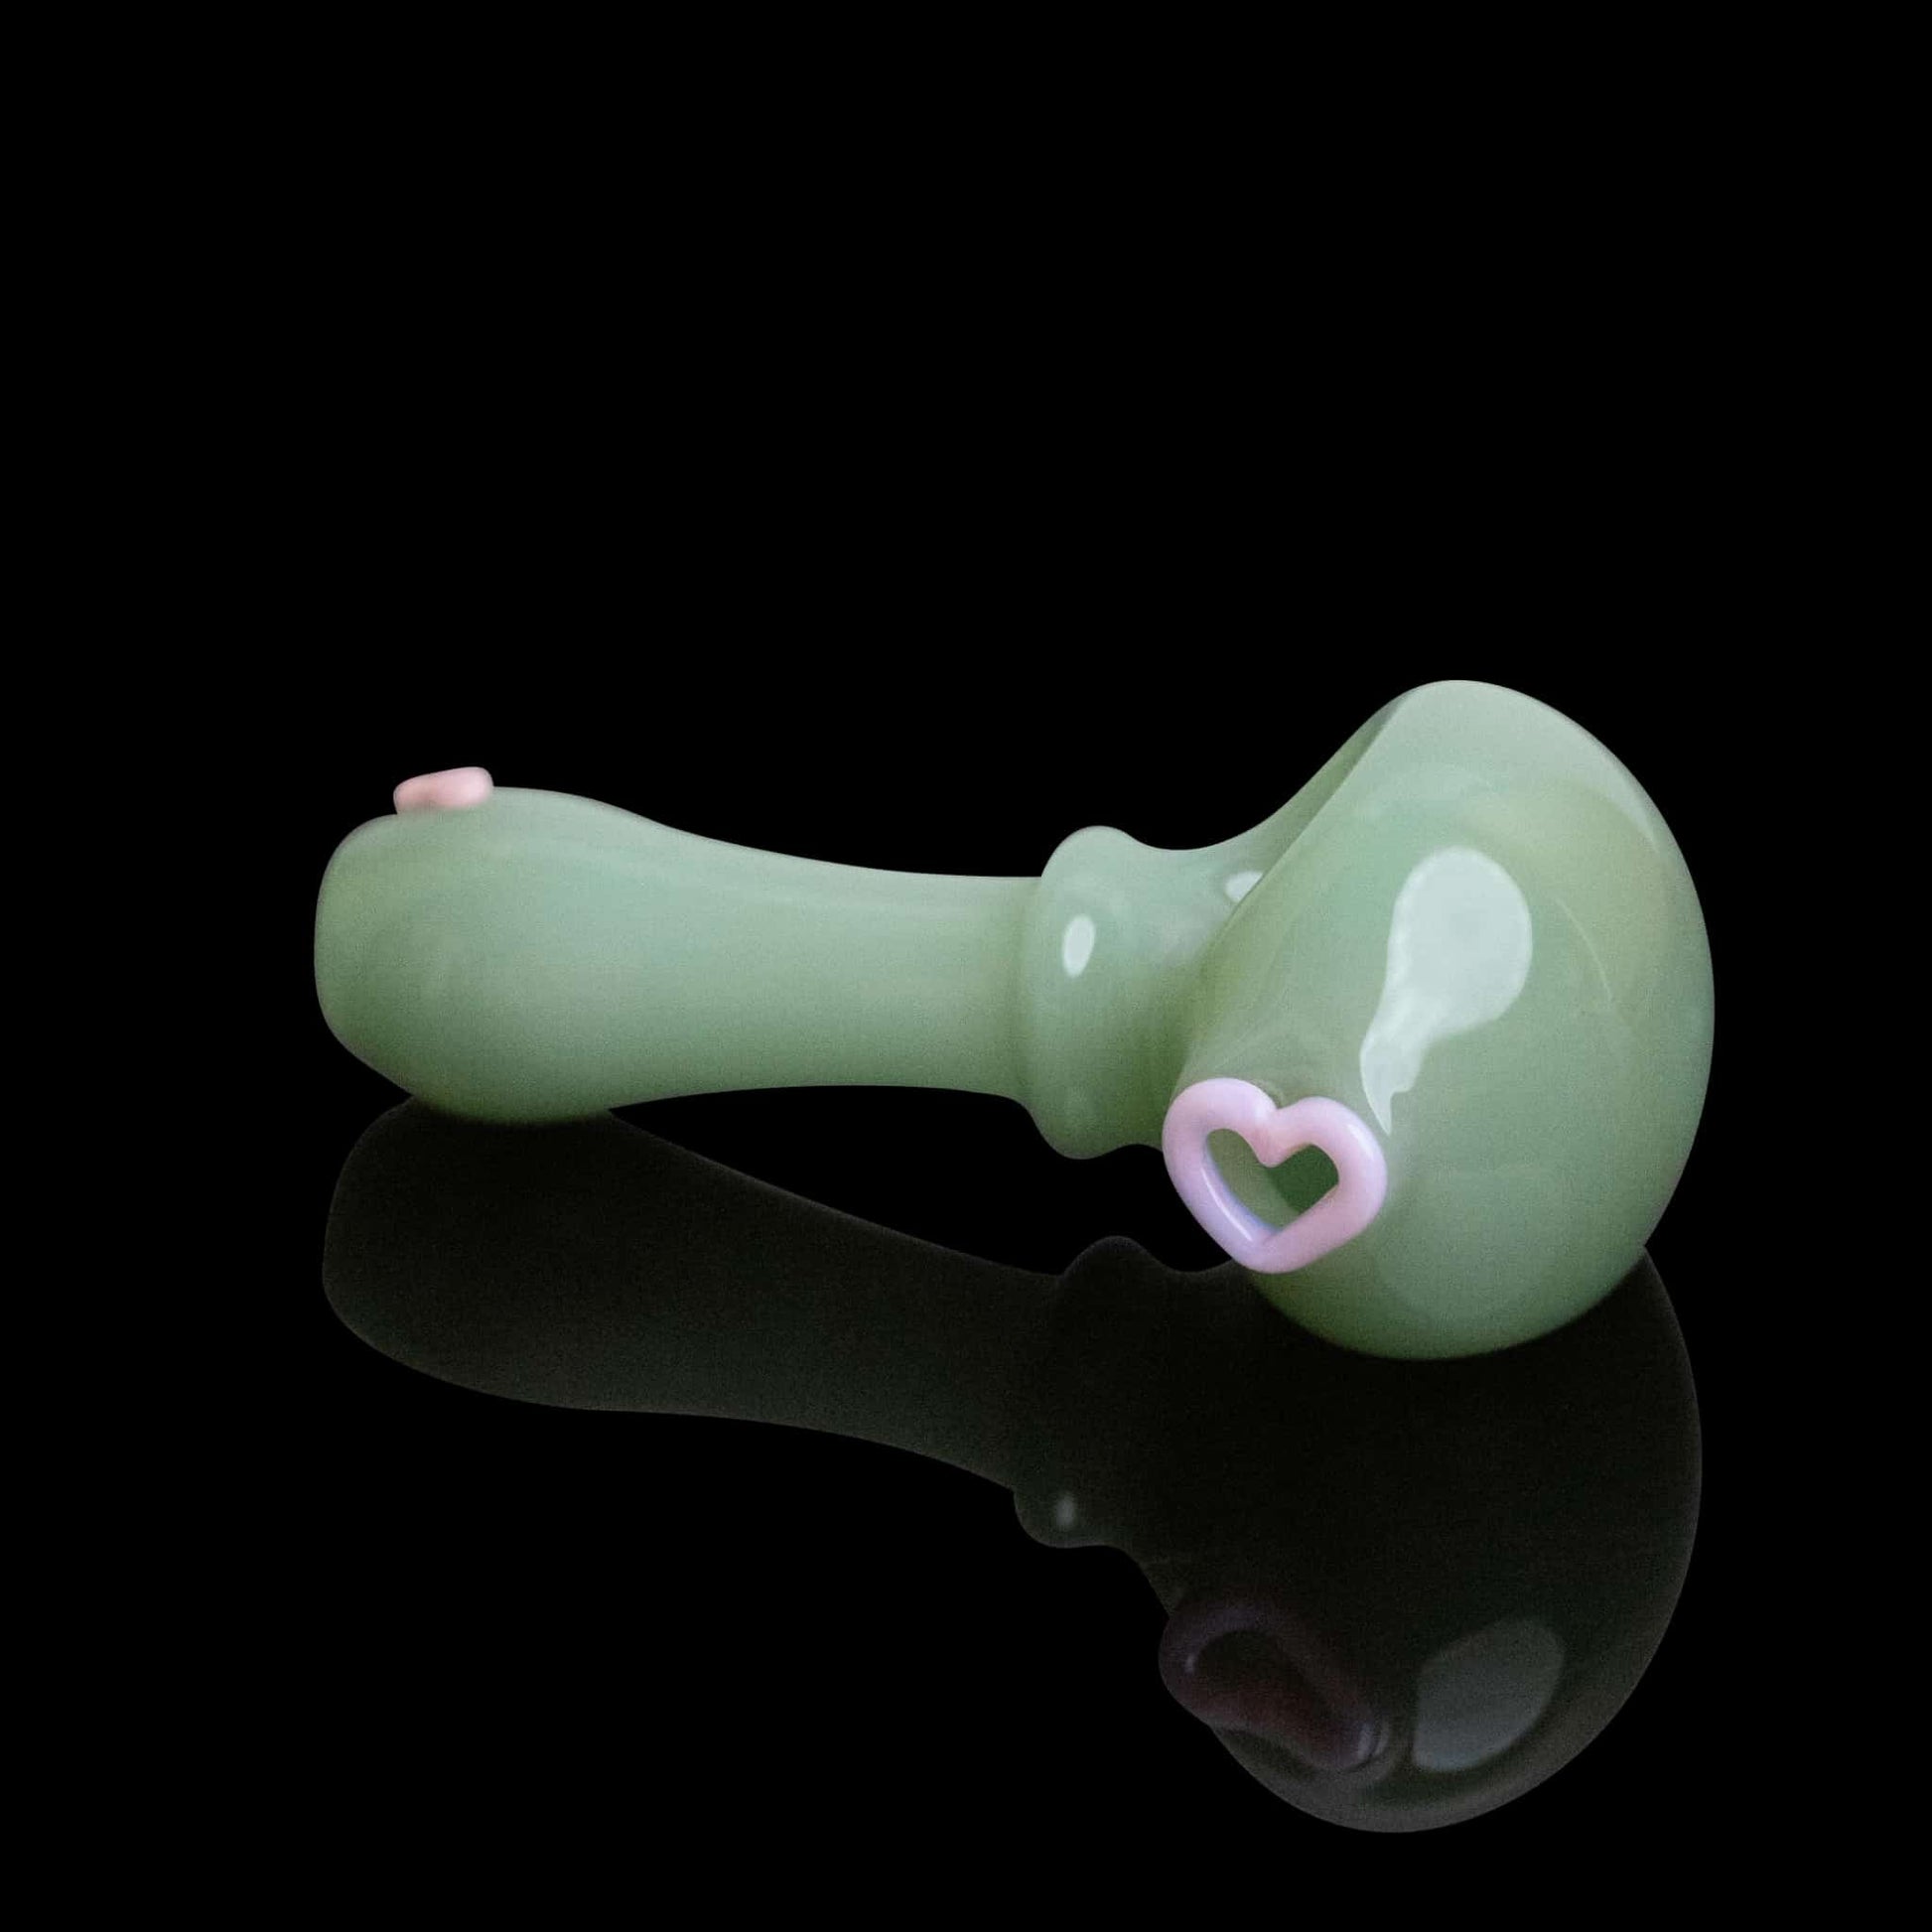 innovative design of the Green Pipe w/ Pink Heart by Sakibomb (2022 Drop)